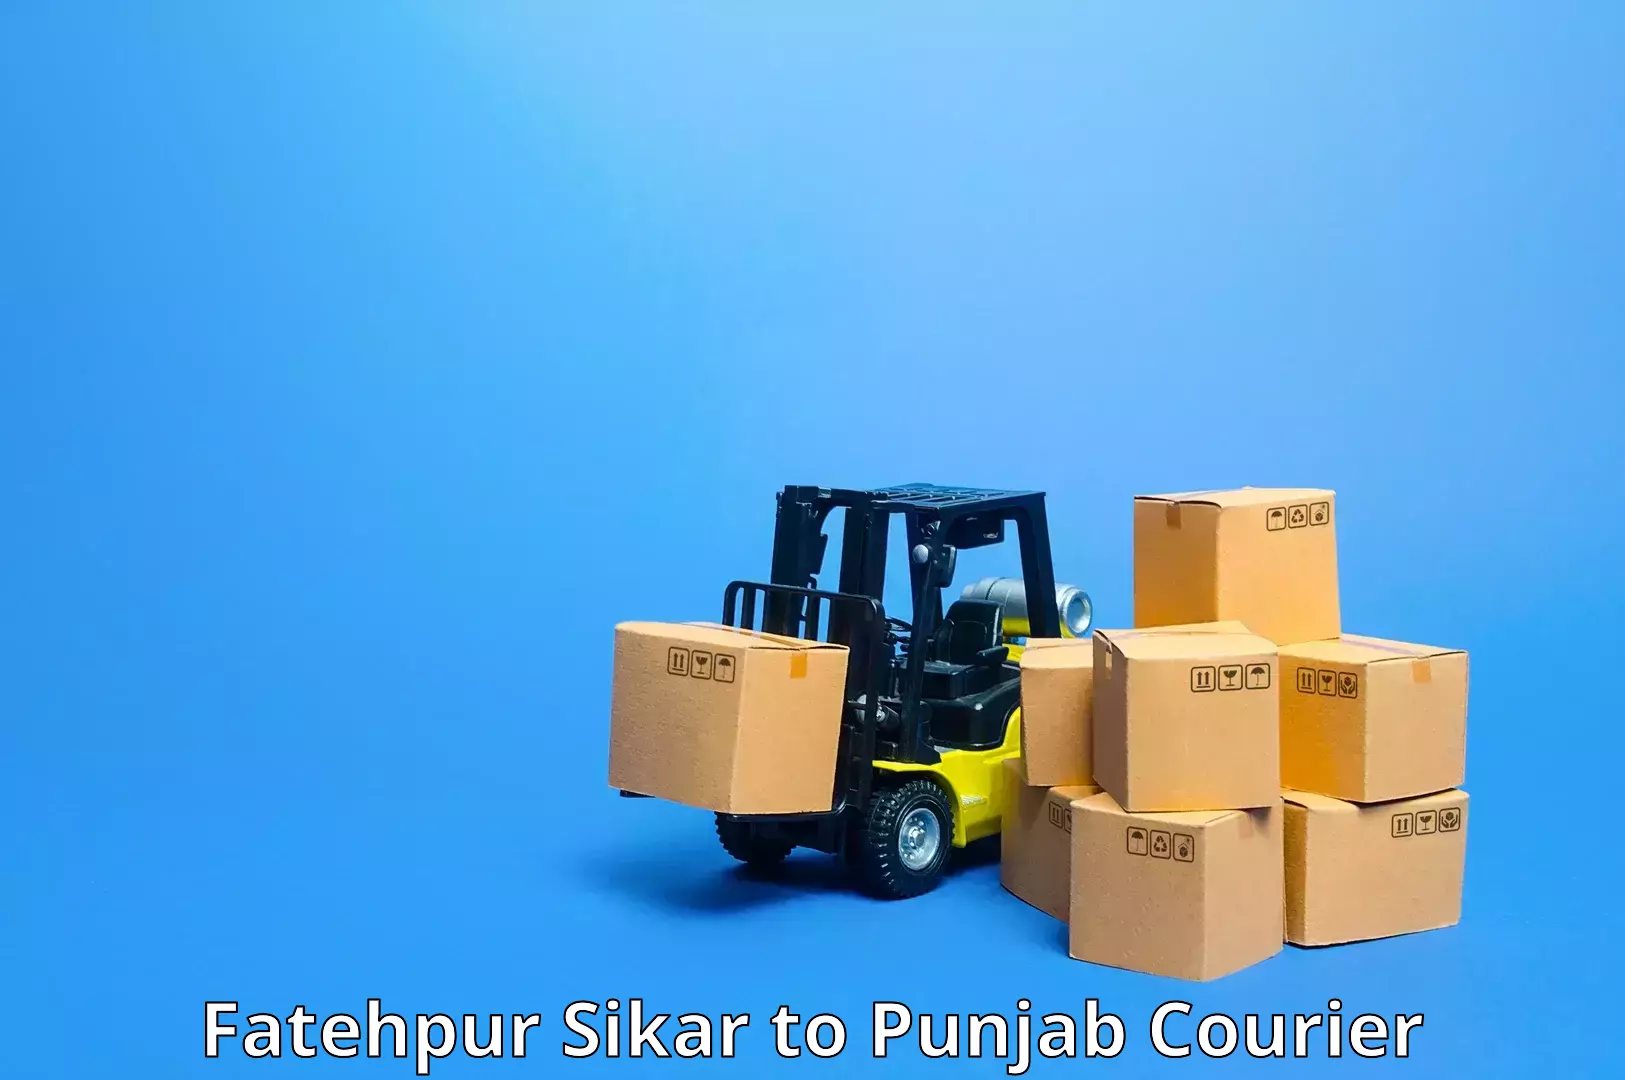 Reliable shipping partners Fatehpur Sikar to Zirakpur